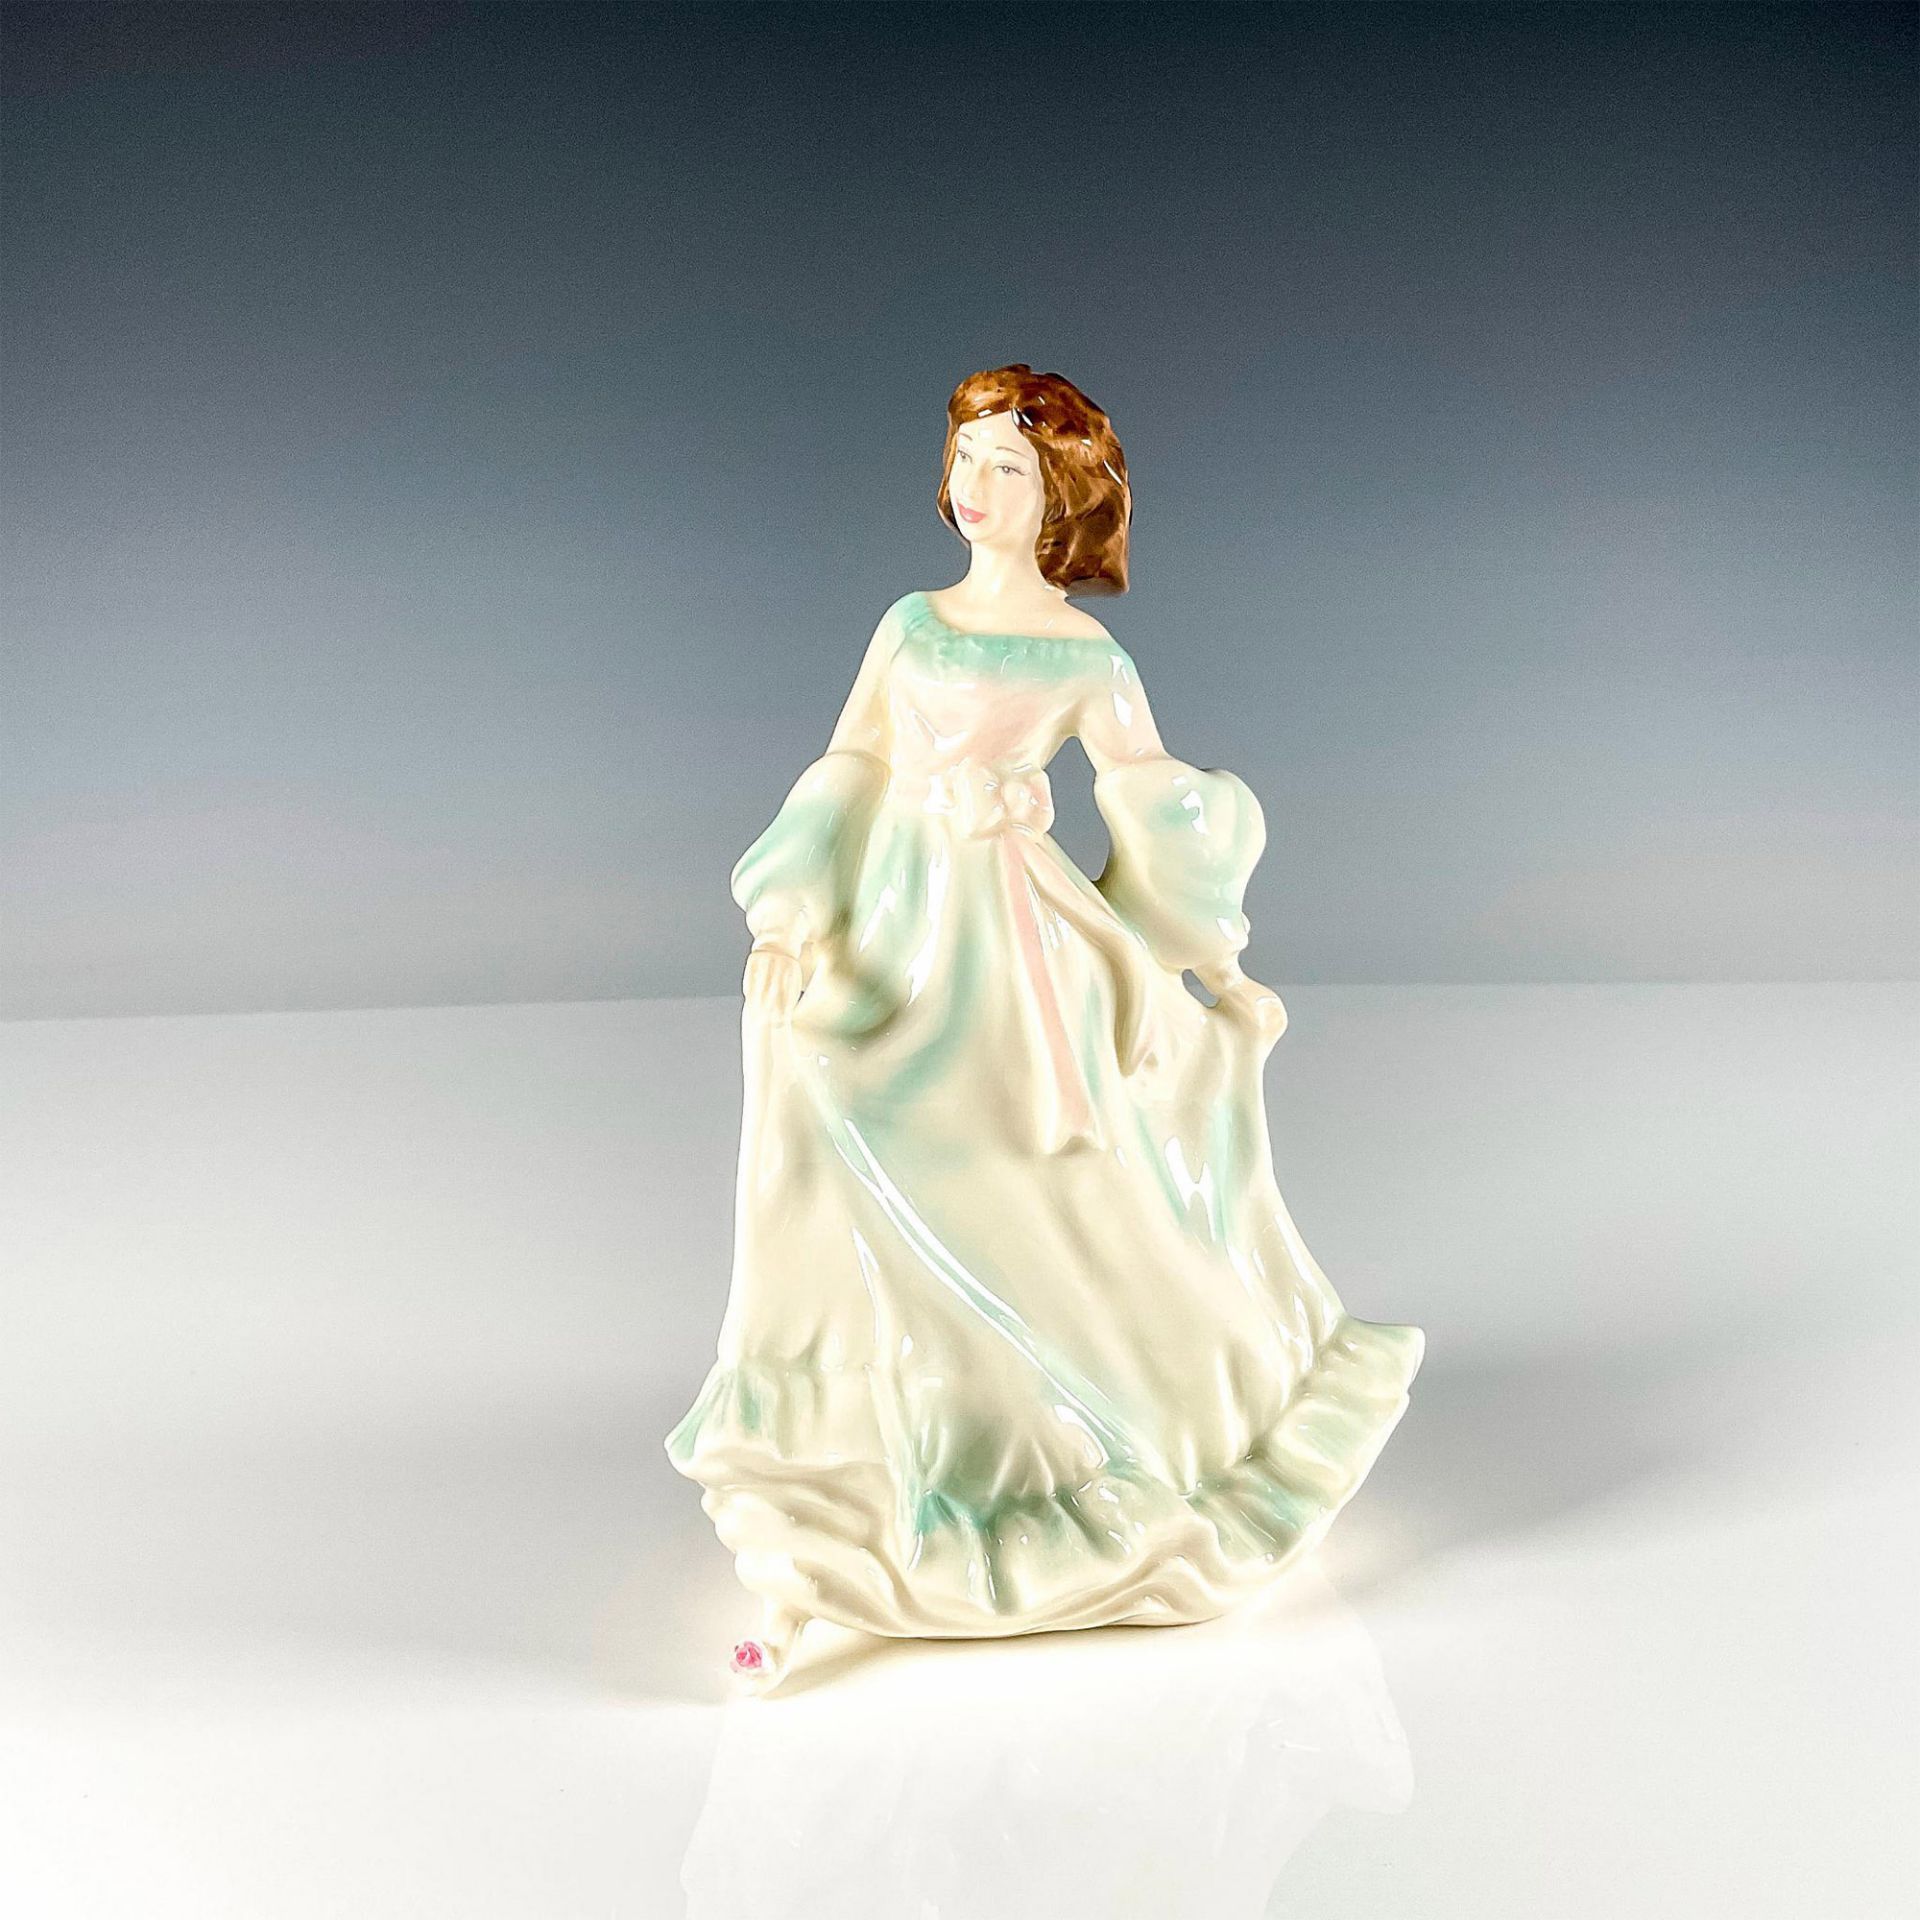 Lady In Dress - Royal Doulton Prototype Figurine - Image 3 of 4